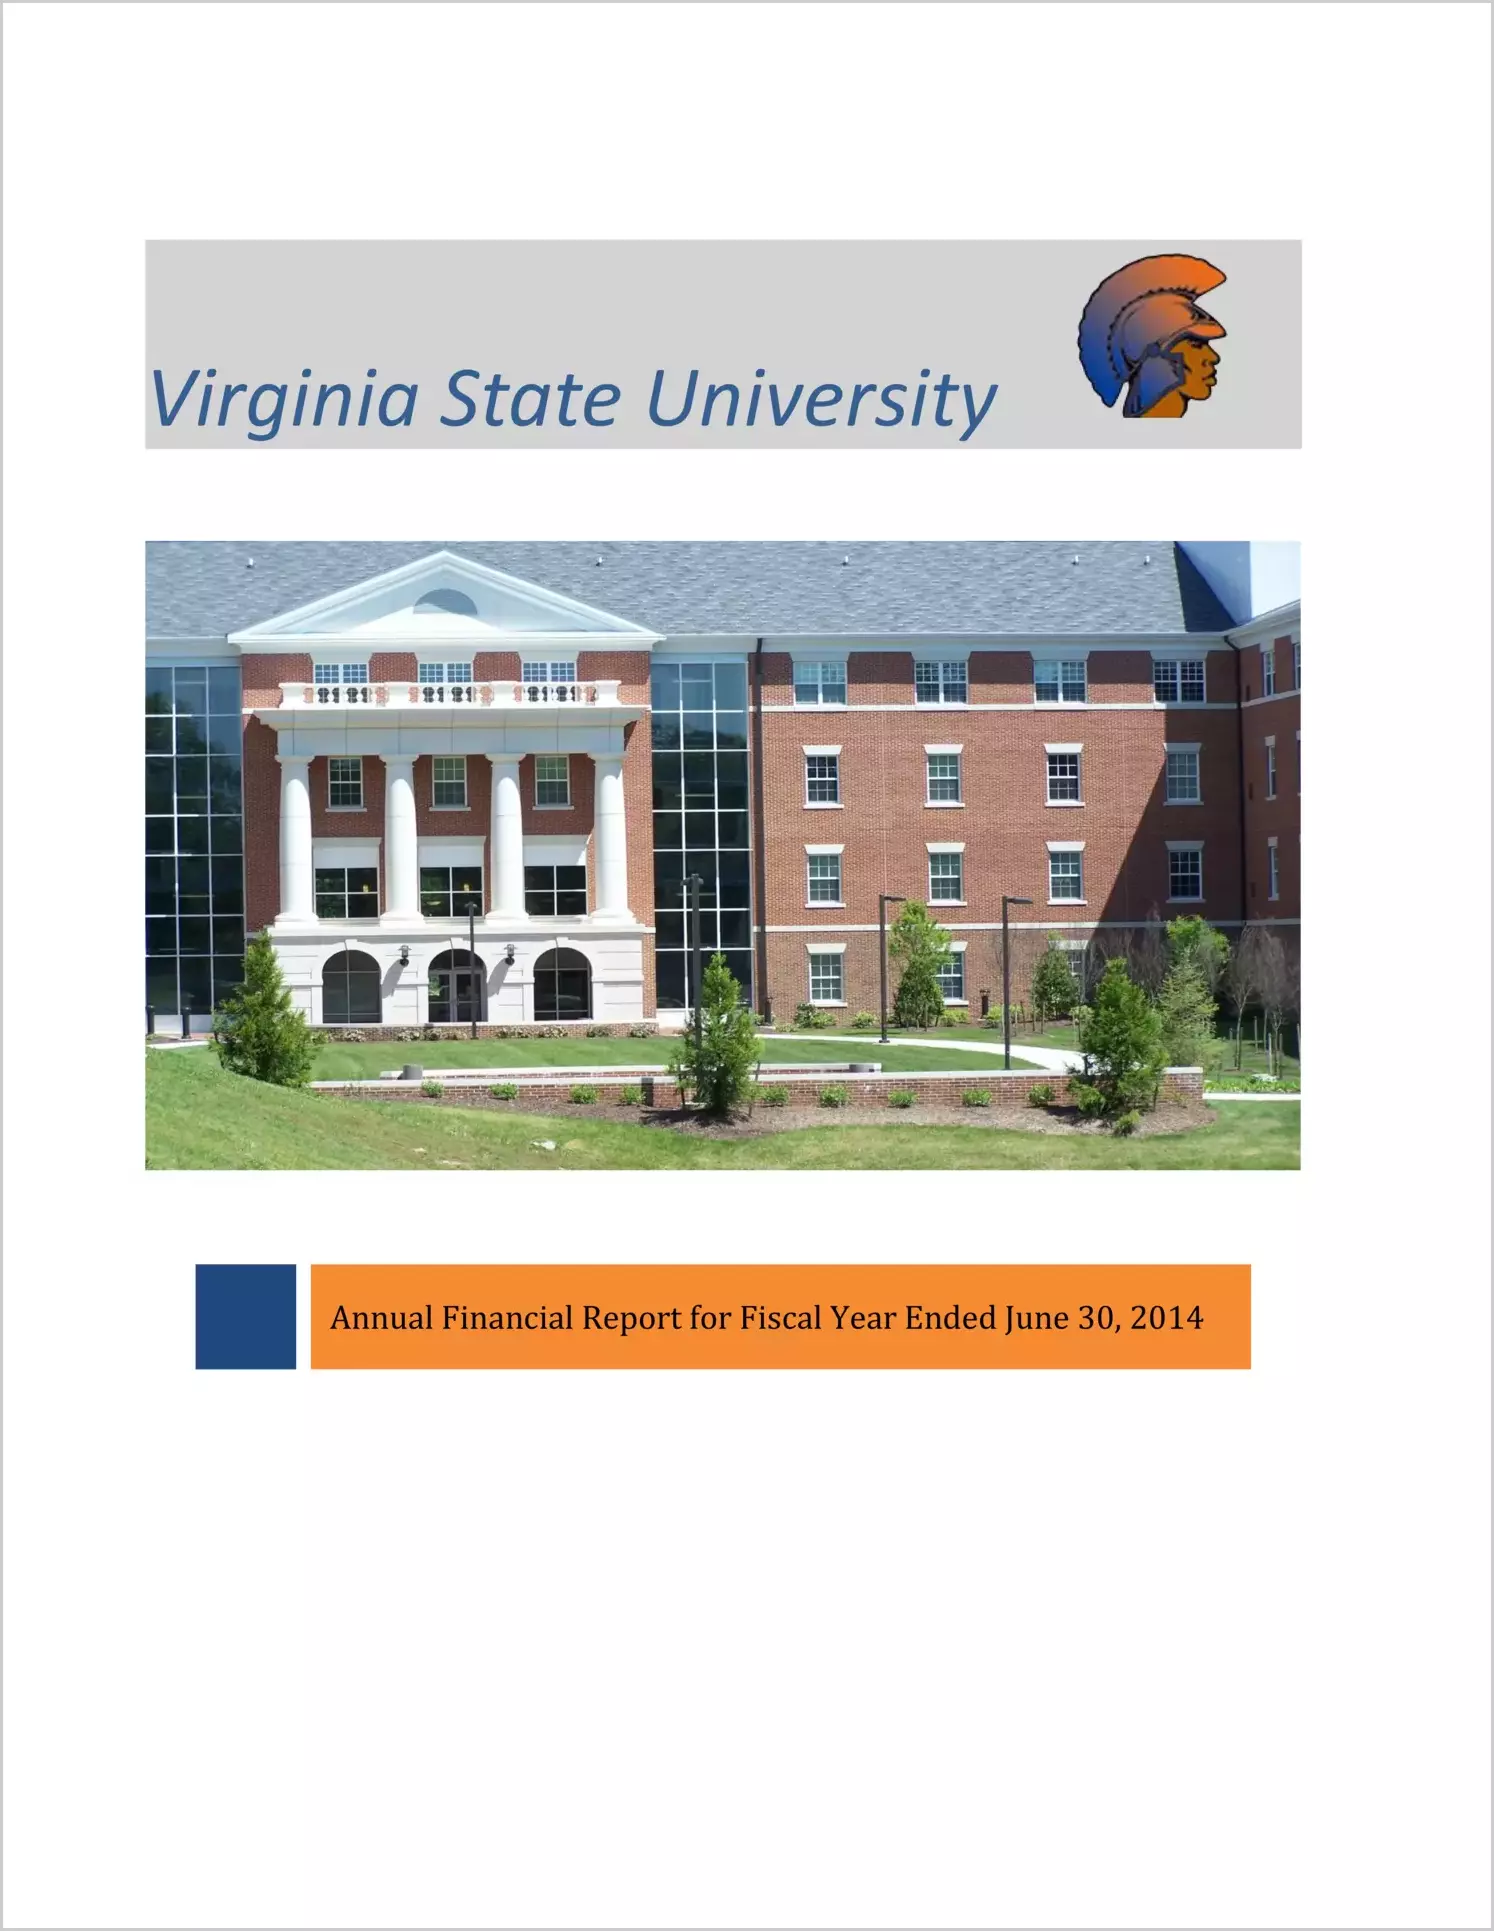 Virginia State University Financial Statement for the year ended June 30, 2014